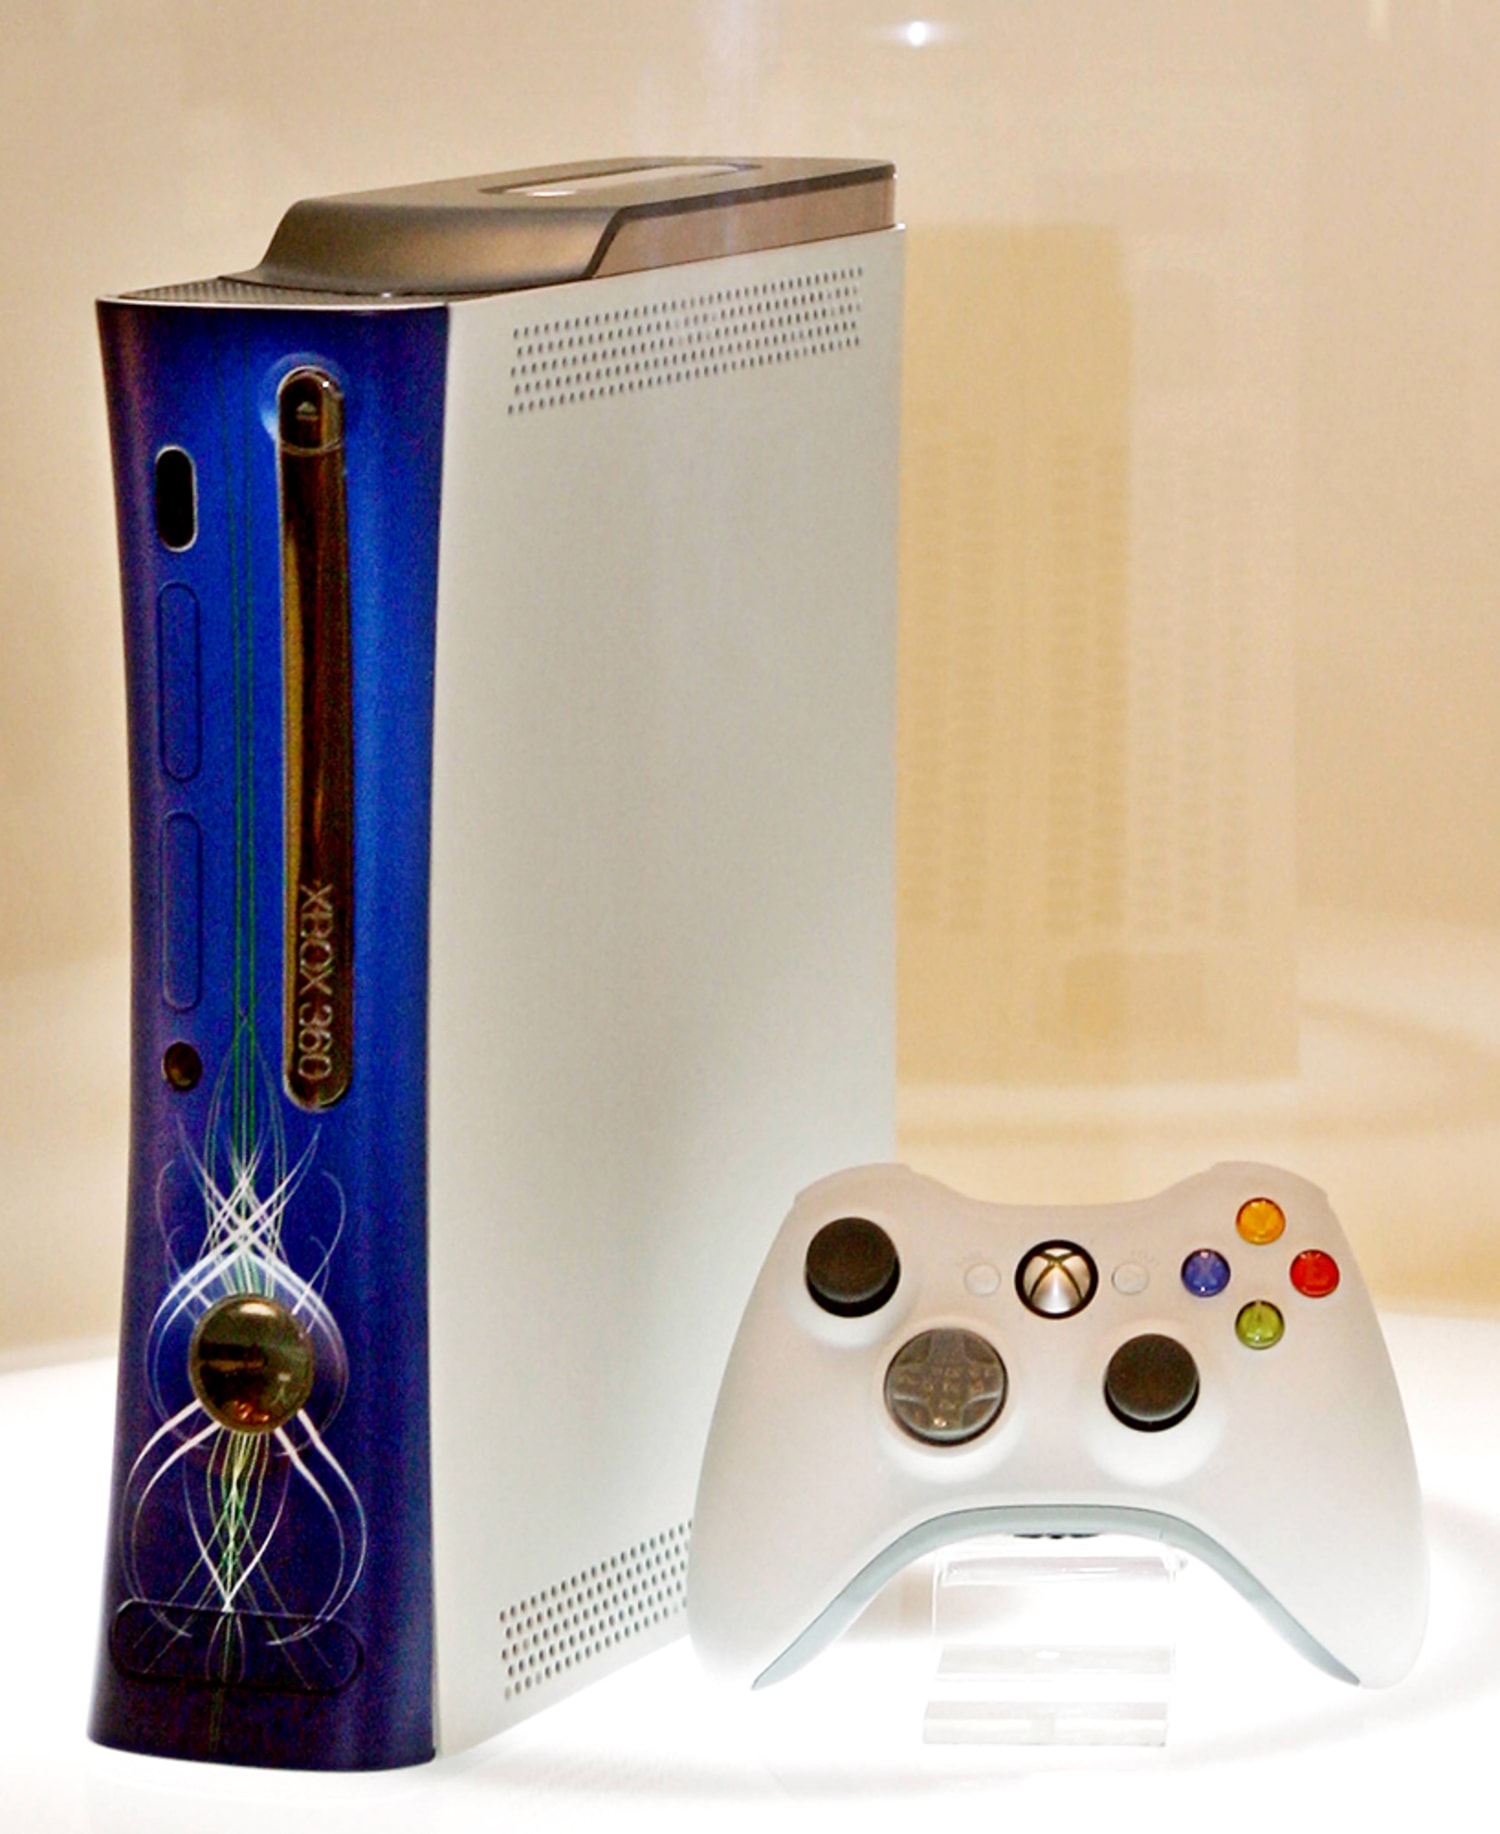 is genoeg landheer Plons Microsoft reveals pricing for Xbox 360 console